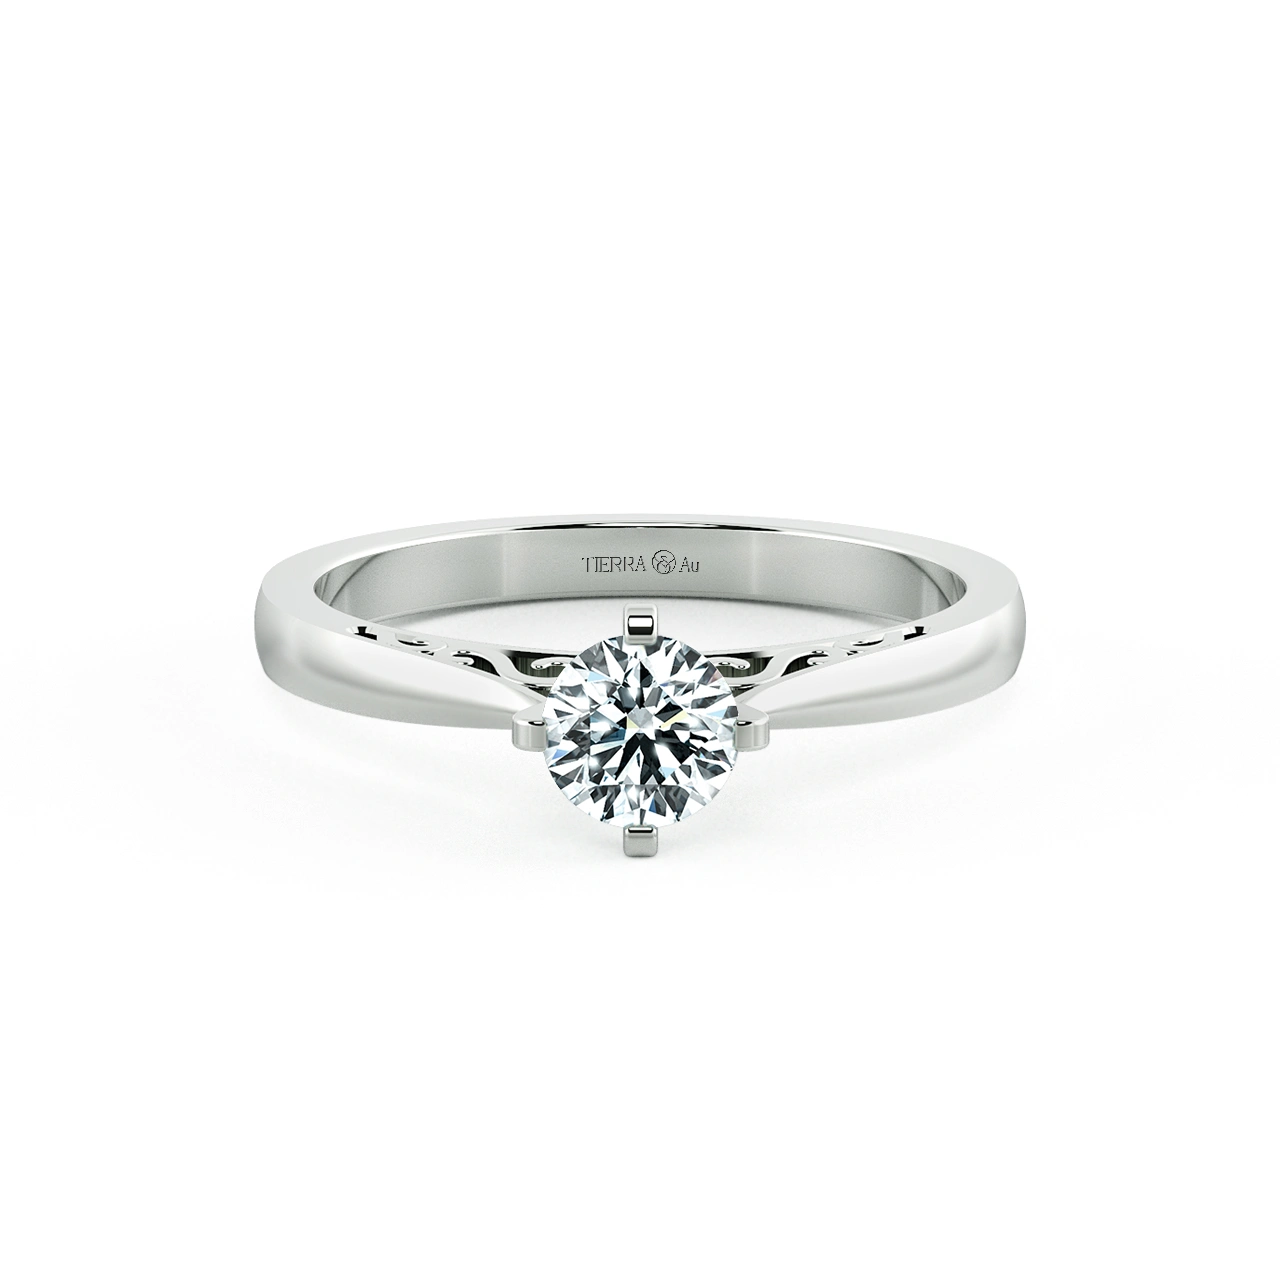 Cathedral Engagement Ring with Pattern Band NCH1508